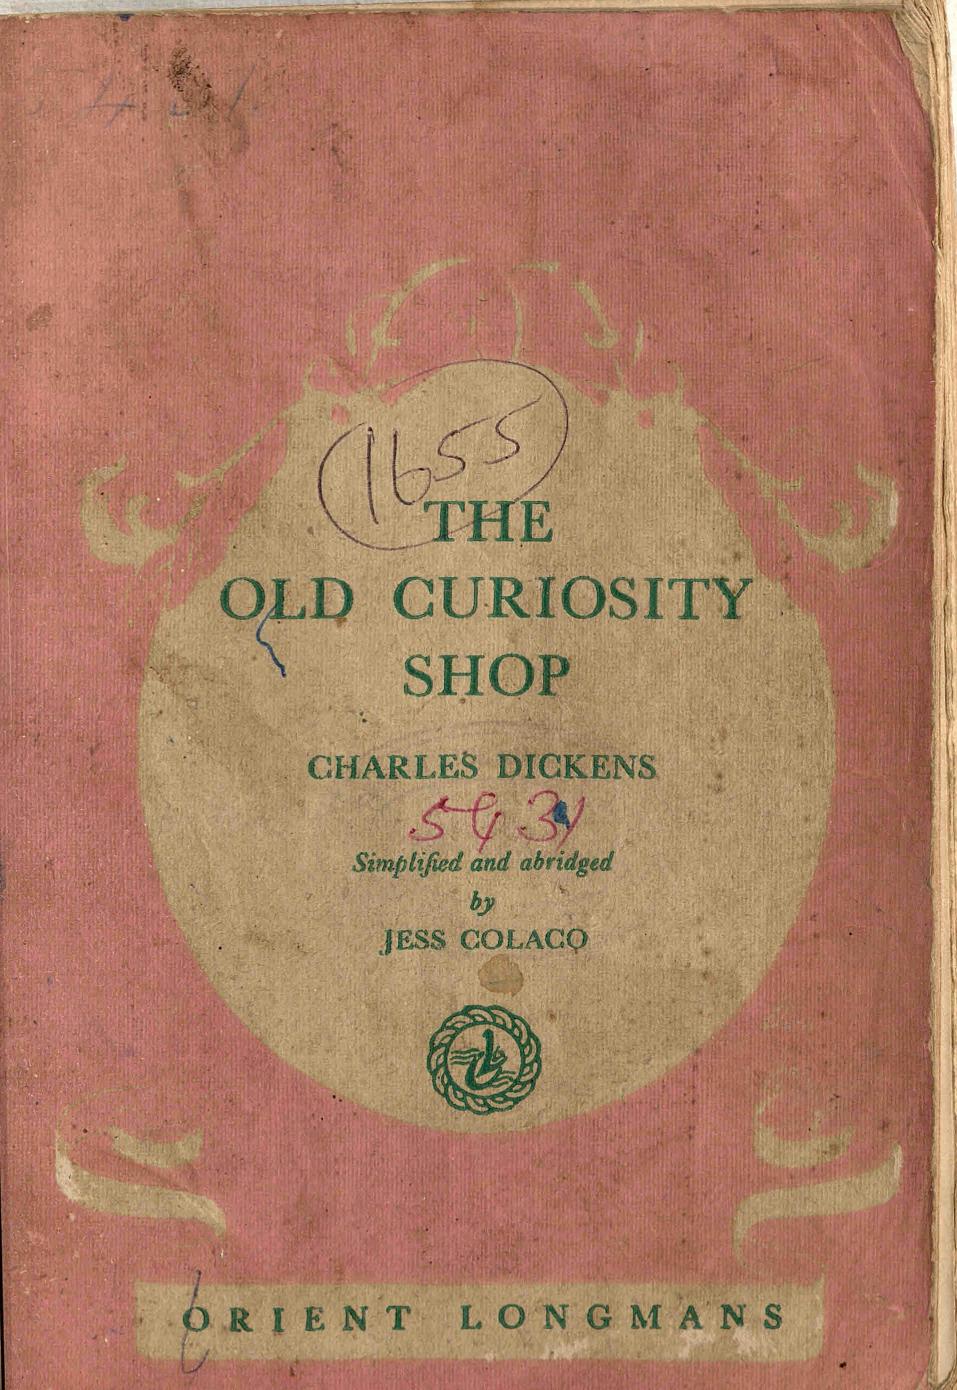  1965 - The Old Curiosity Shop - Charles Dickens